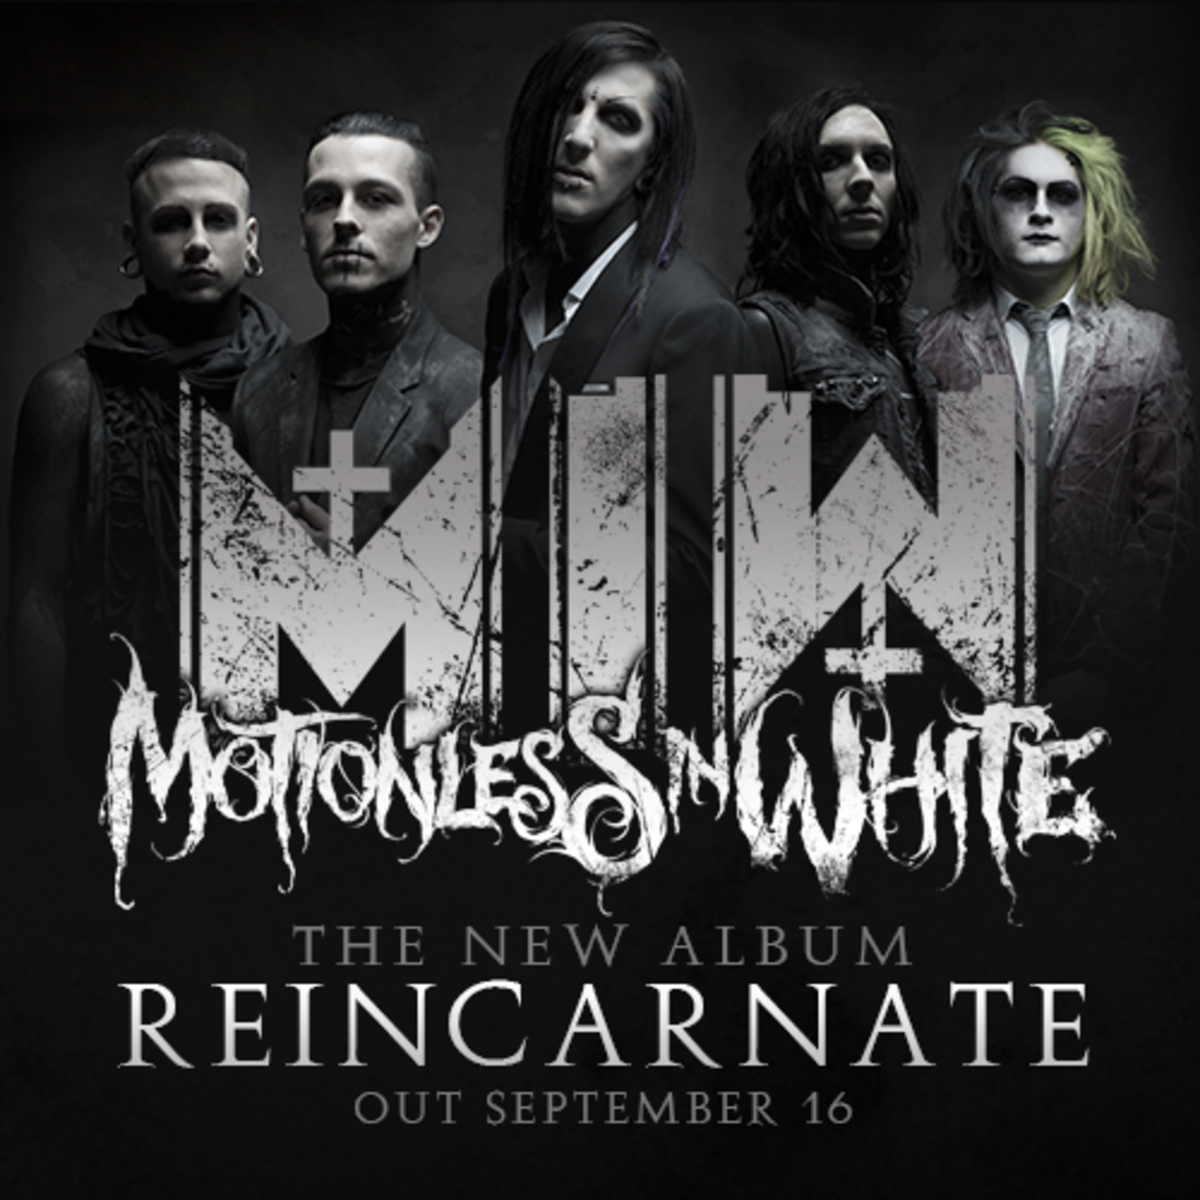 MOTIONLESS IN WHITE UNLEASH MUSIC VIDEO FOR “REINCARNATE”, TITLE TRACK